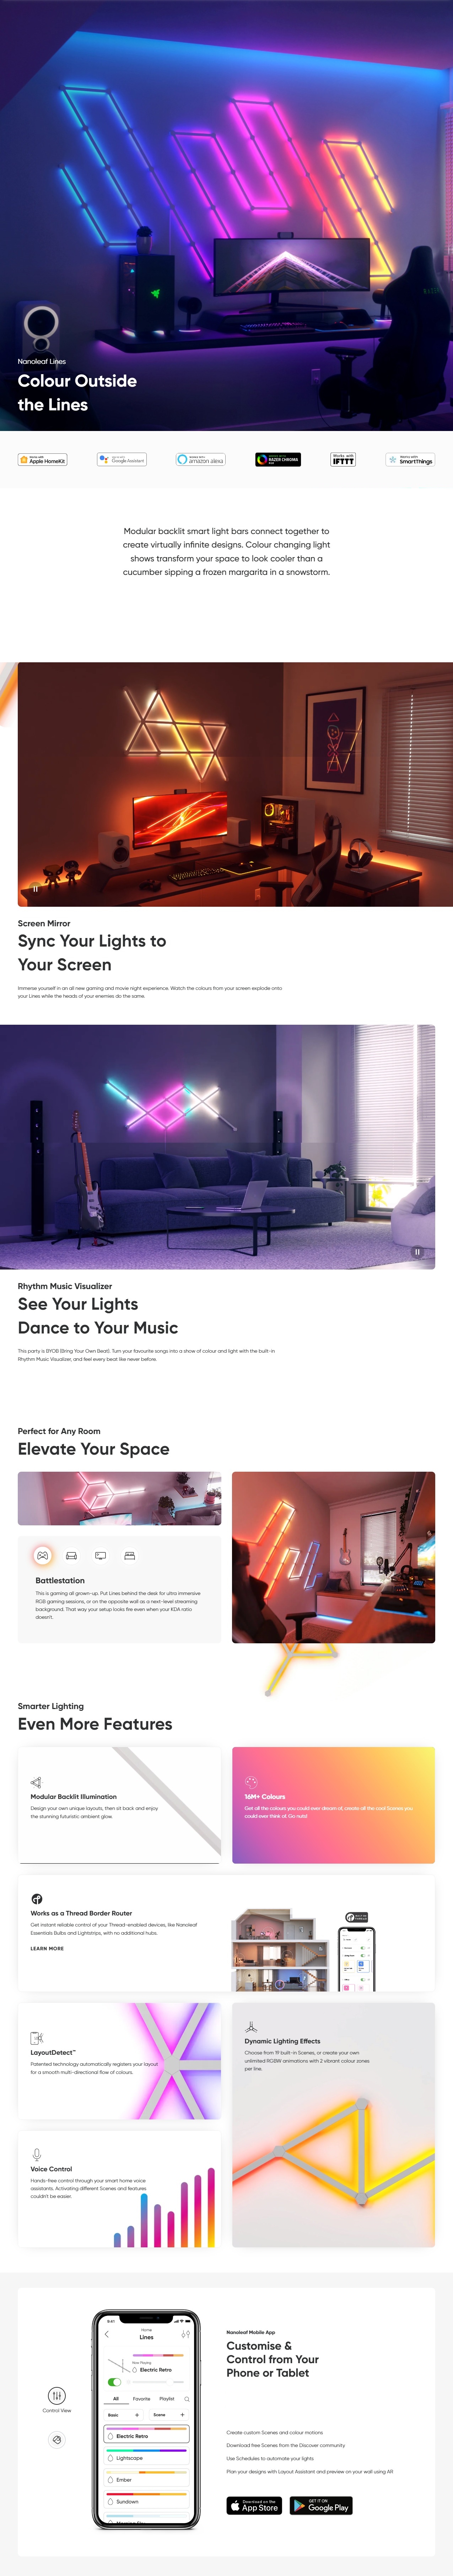 A large marketing image providing additional information about the product Nanoleaf Lines Expansion Pack - 3 Pack - Additional alt info not provided